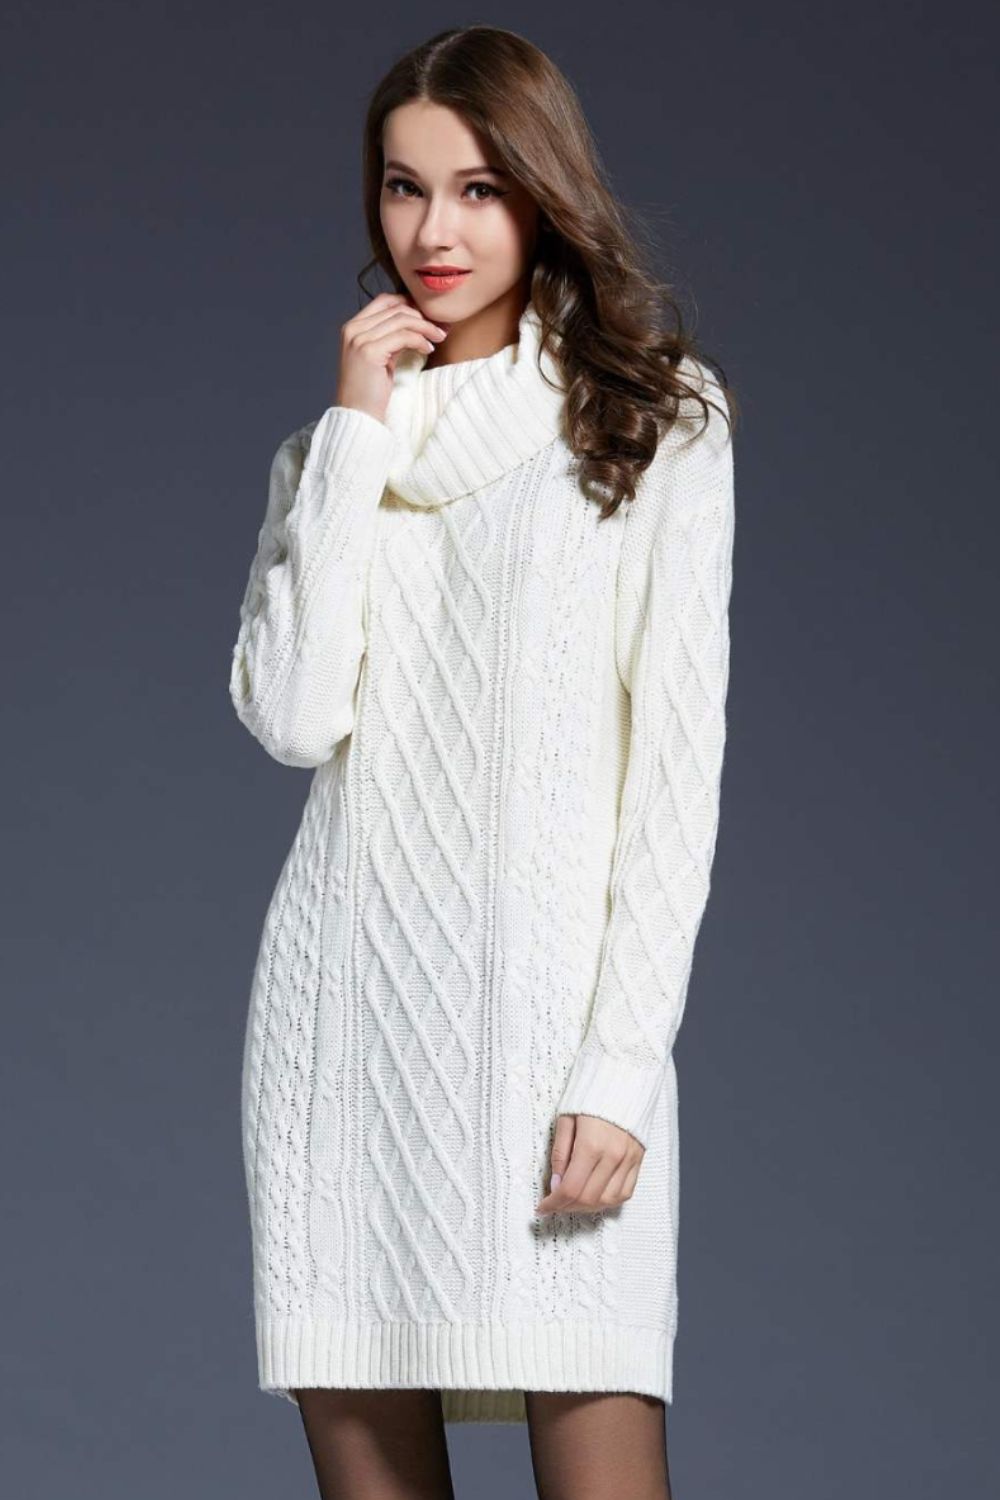 Women’s Full Size Mixed Knit Cowl Neck Dropped Shoulder Sweater Dress